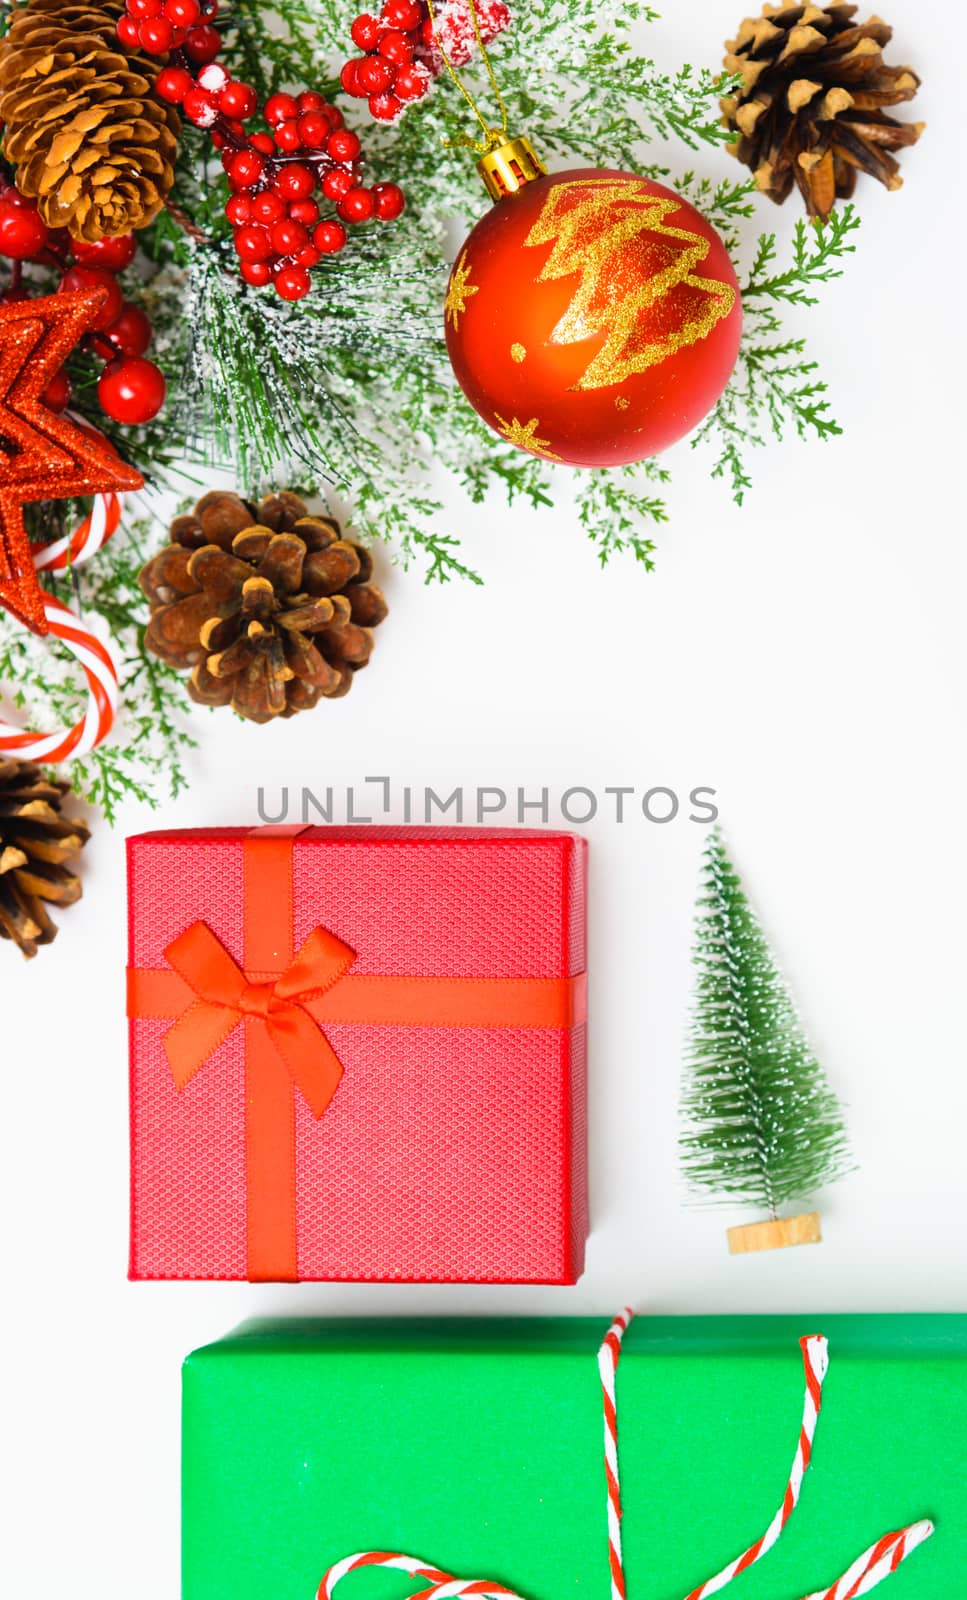 Christmas composition decorations, fir tree branches on white background. Merry Christmas concept. Copy space for text